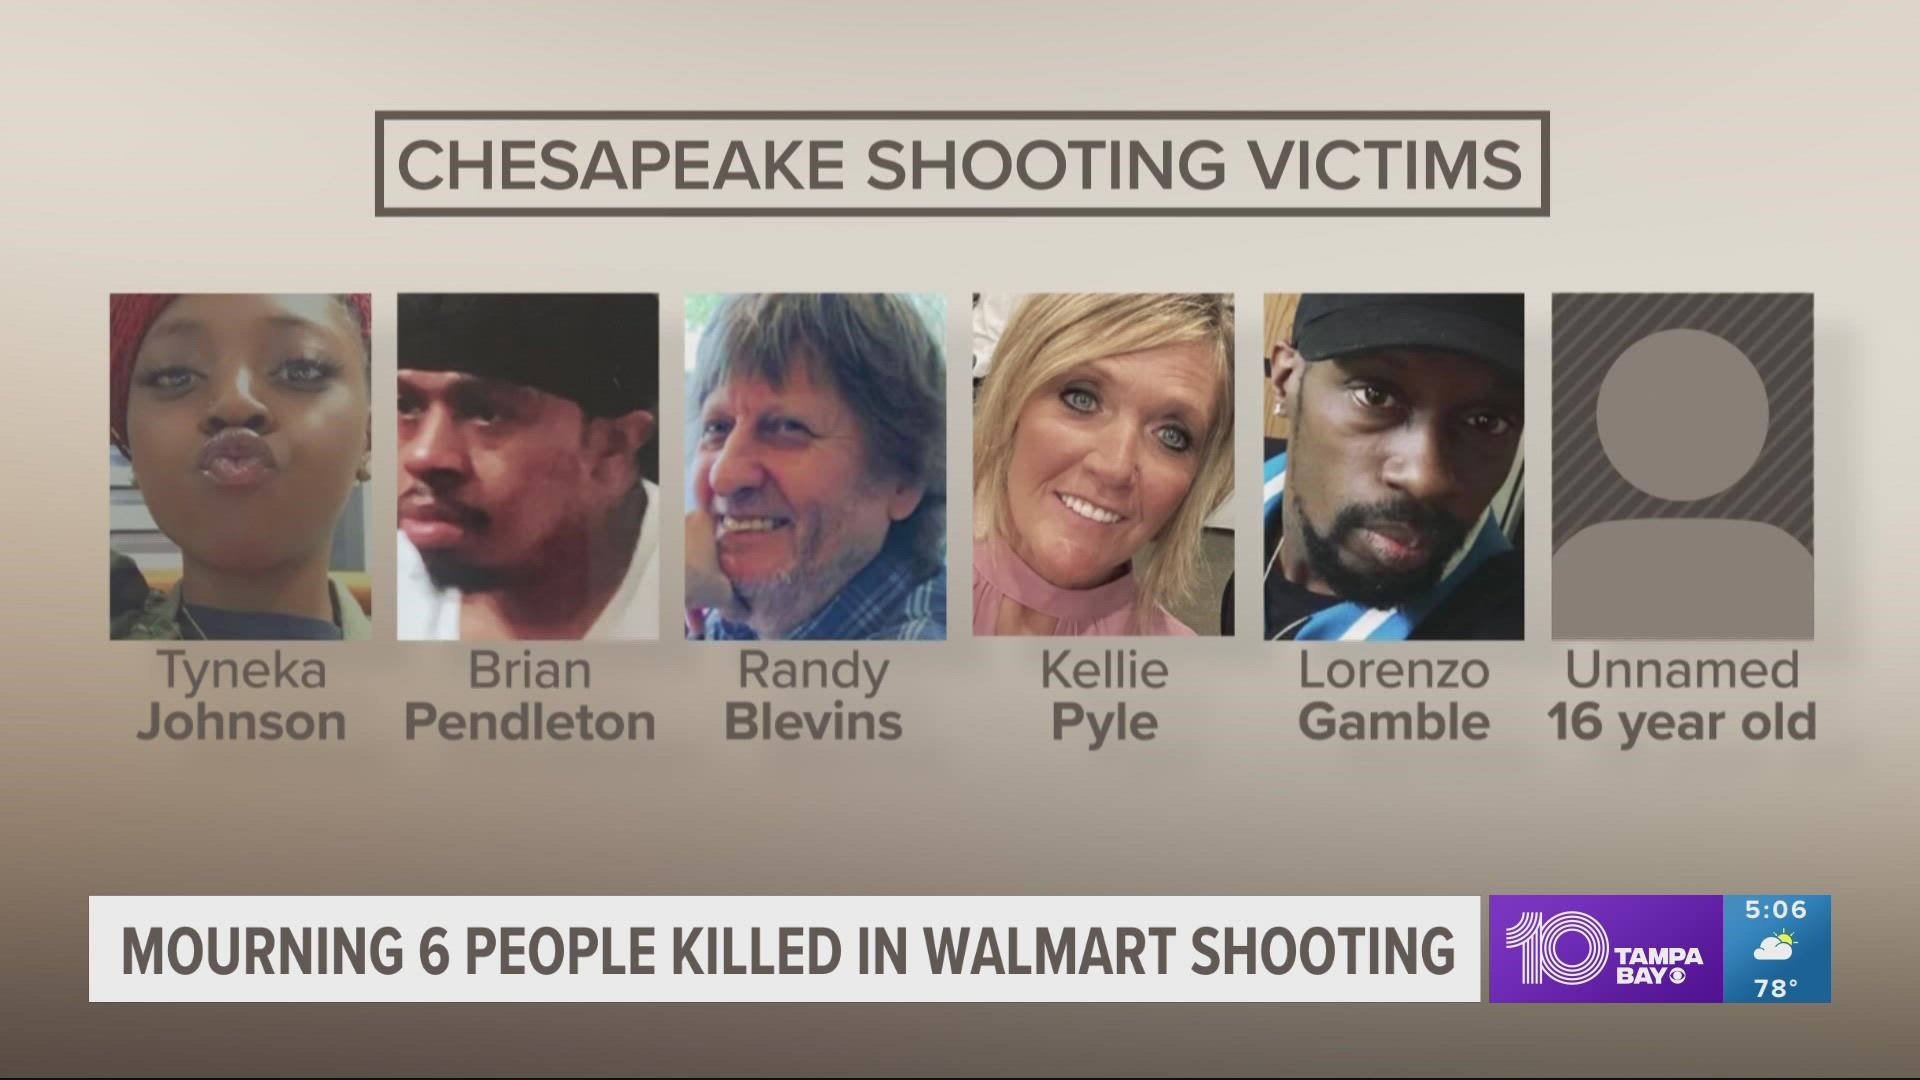 Police confirmed the gunman is dead, and that there were 6 victims killed. Walmart identified the suspected shooter as Andre Bing, a store associate.